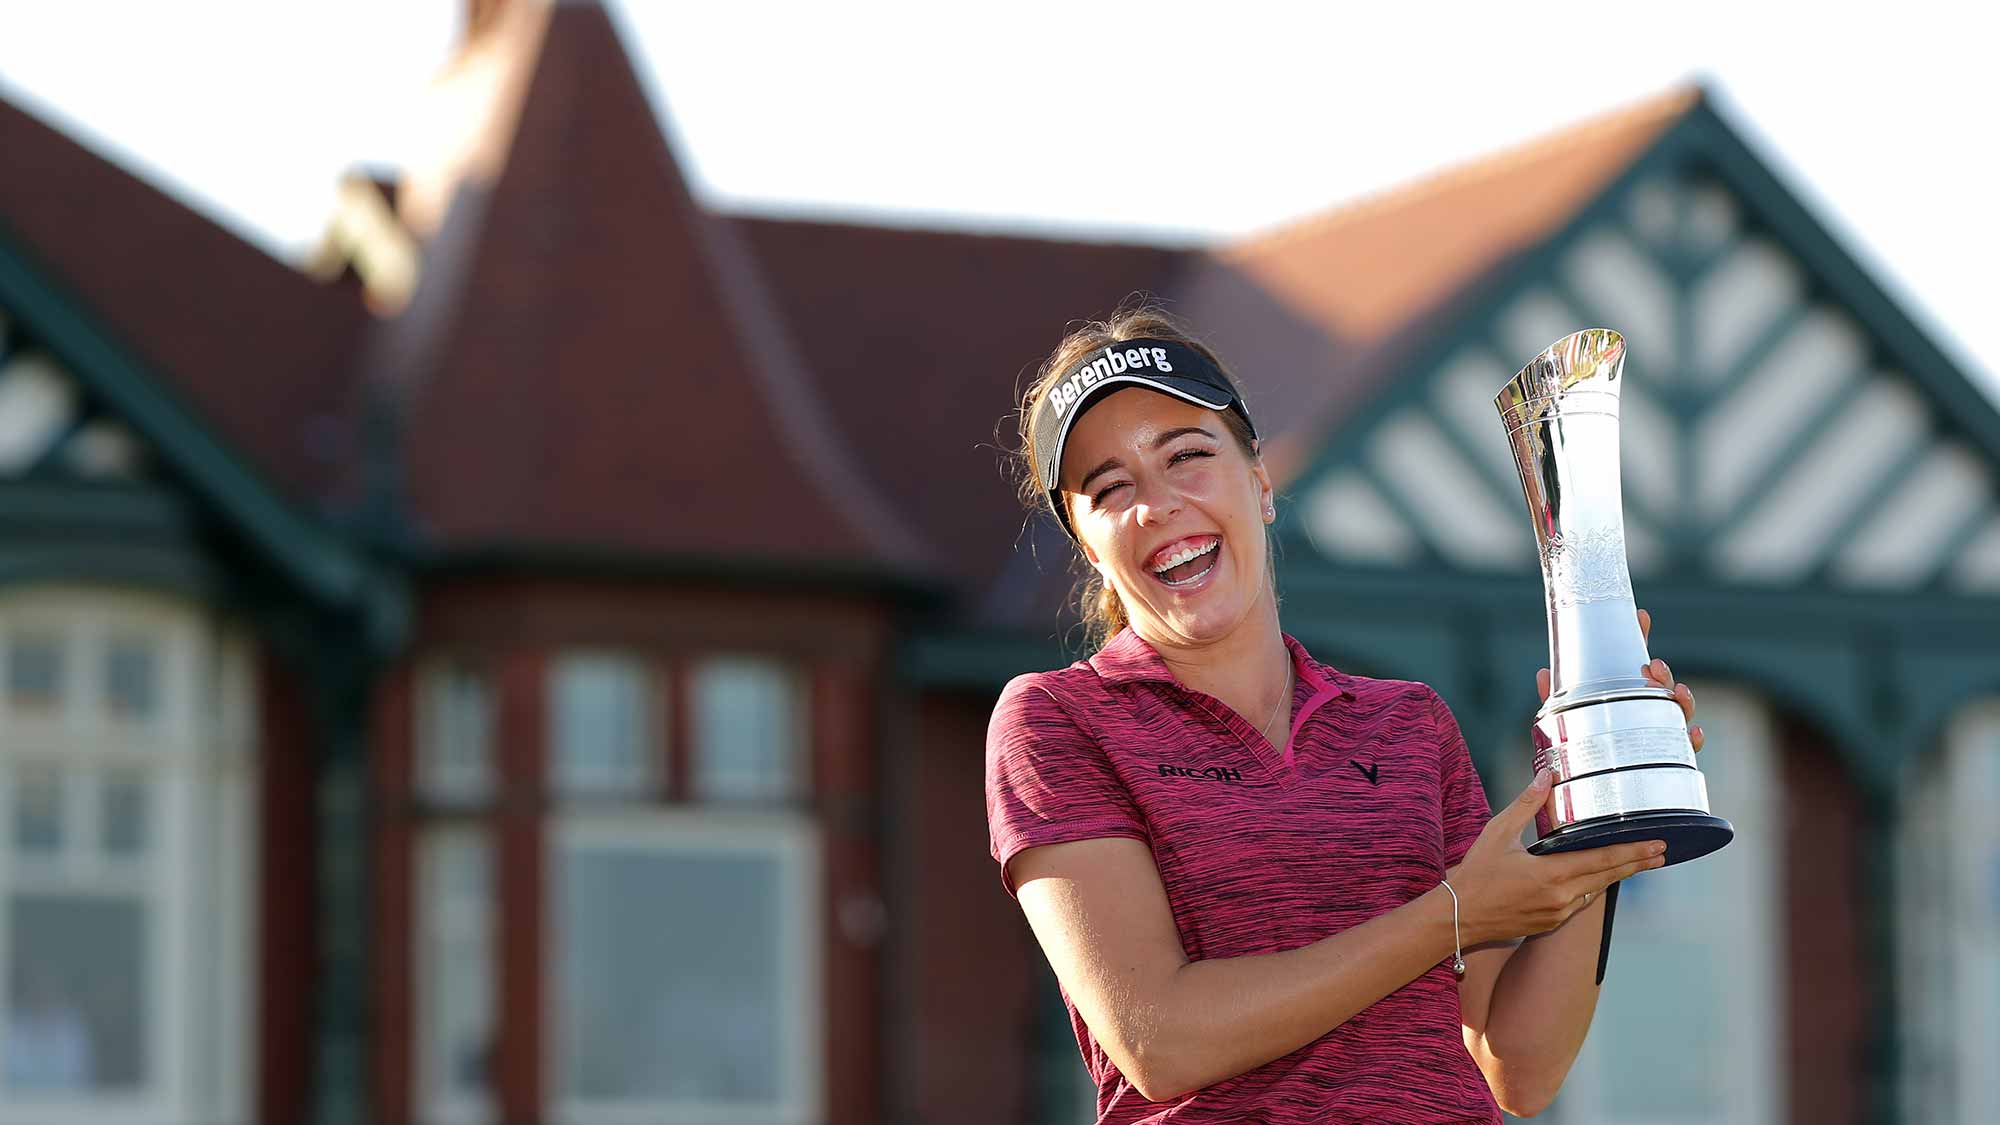 Georgia Hall of England poses for a photo with her trophy after winning the tournament during day four of Ricoh Women's British Open at Royal Lytham & St. Annes on August 5, 2018 in Lytham St Annes, England